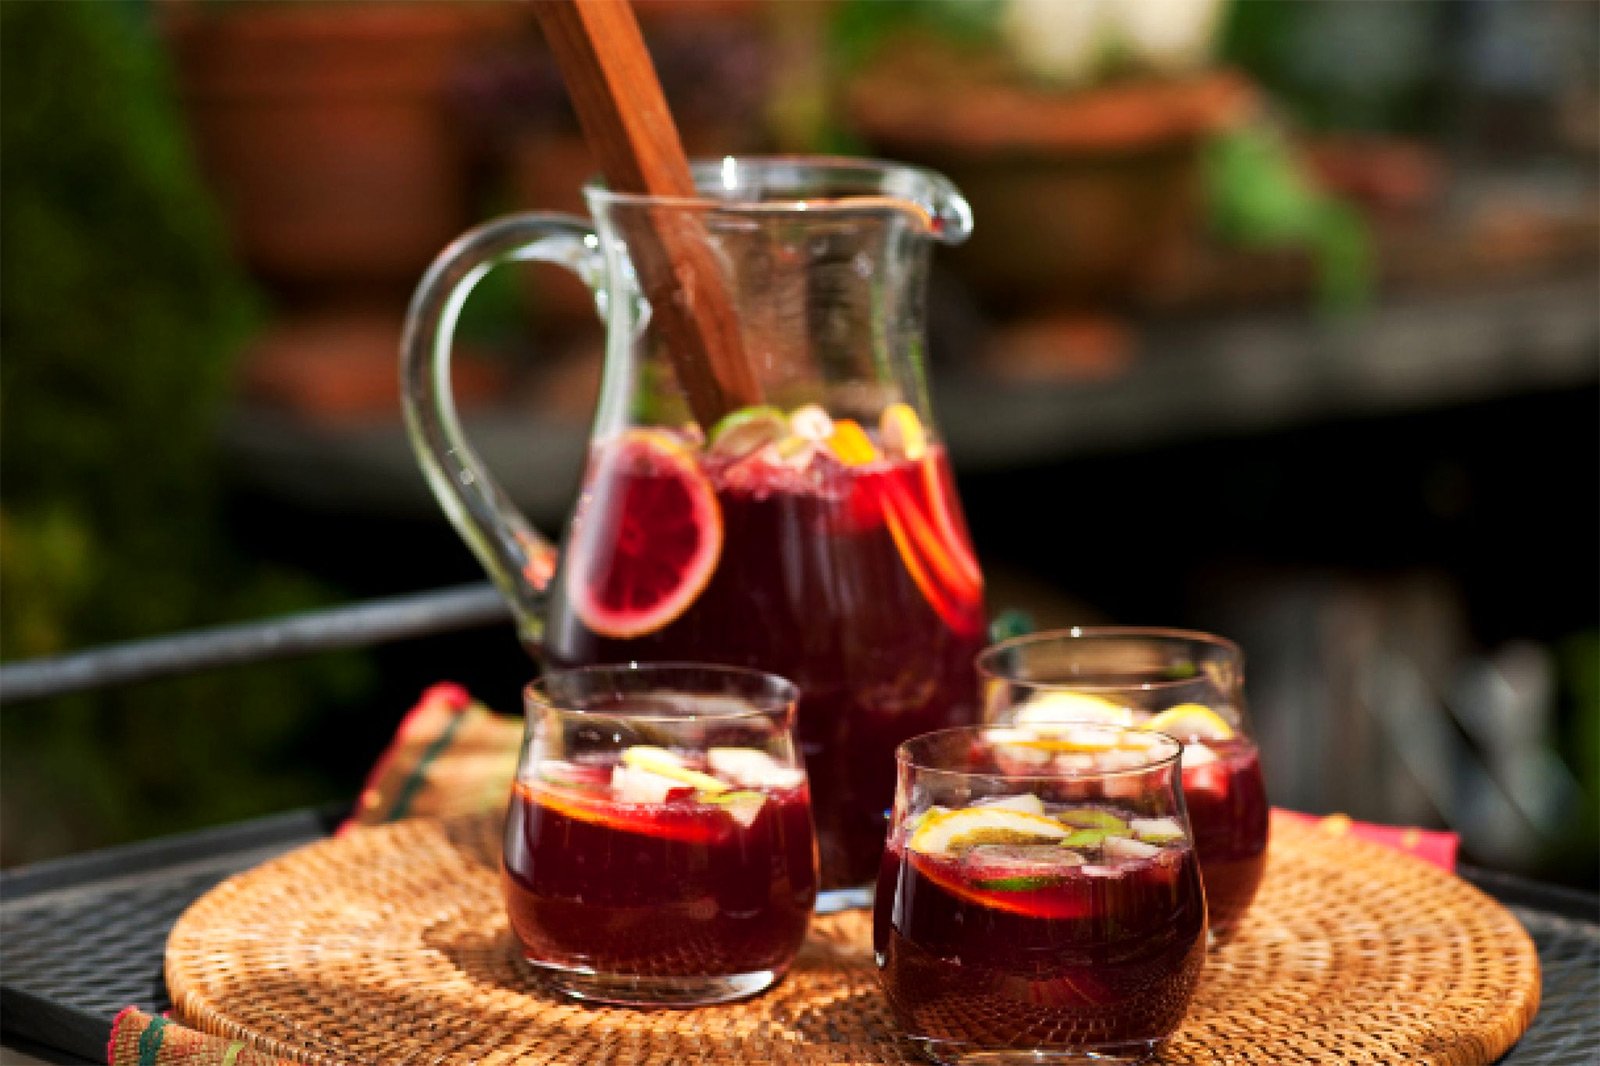 How to try sangria in Madrid